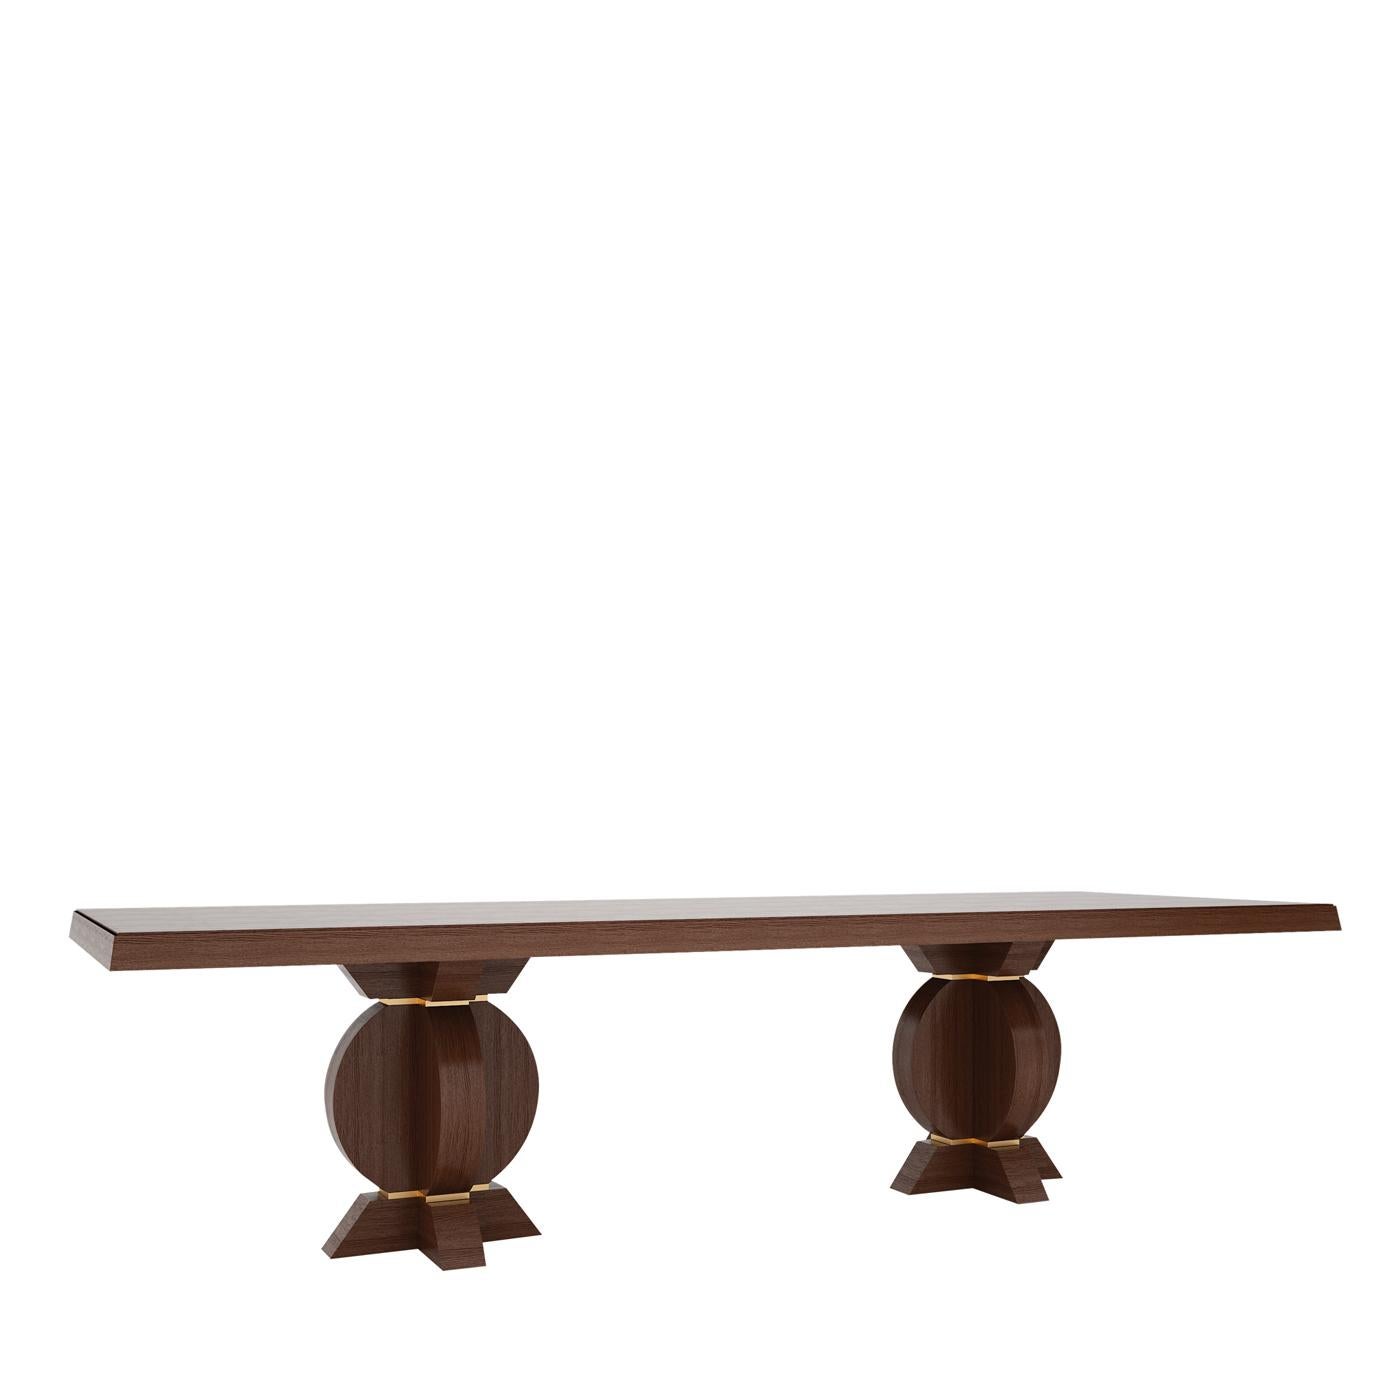 Italian Gramercy Dining Table by Giannella Ventura